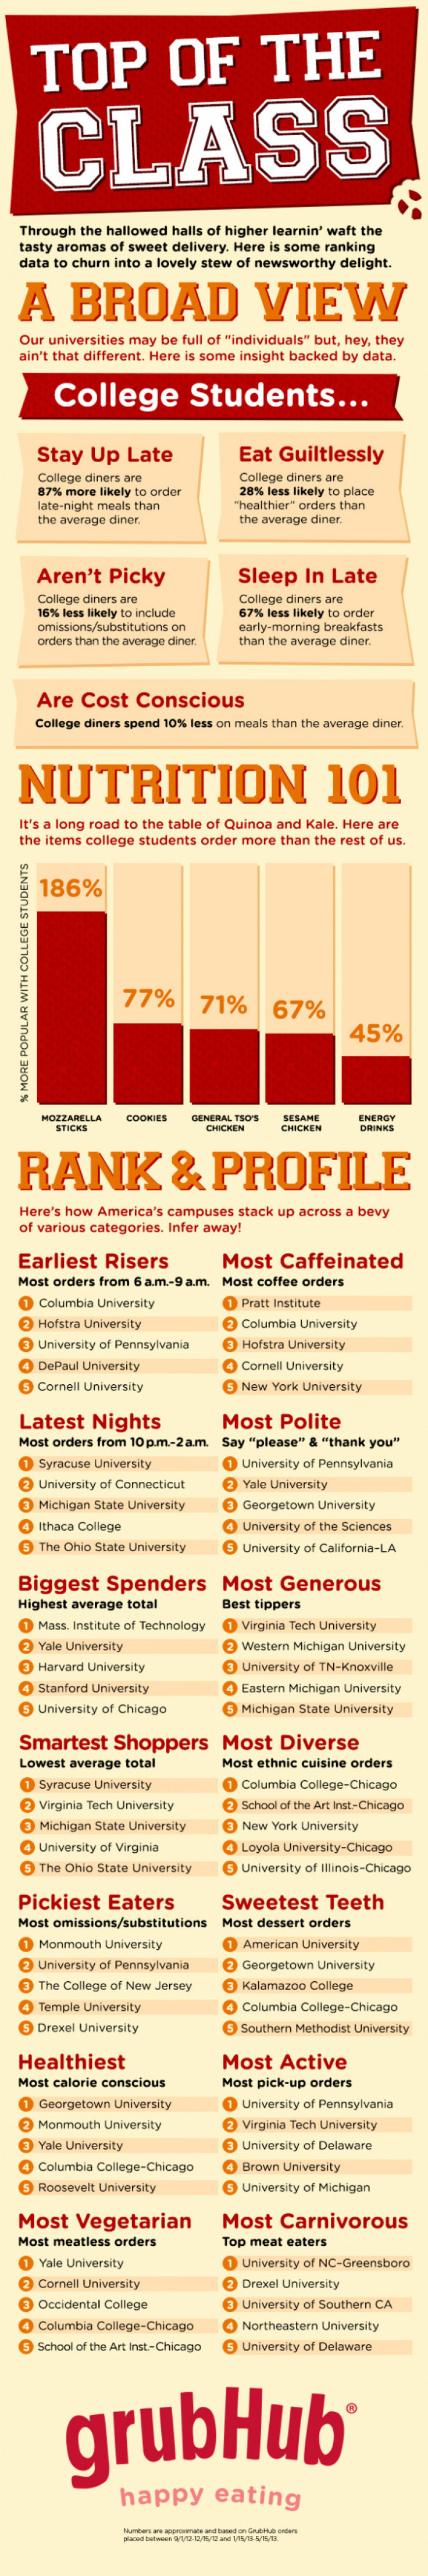 Top of the Class: Trends in College Eating